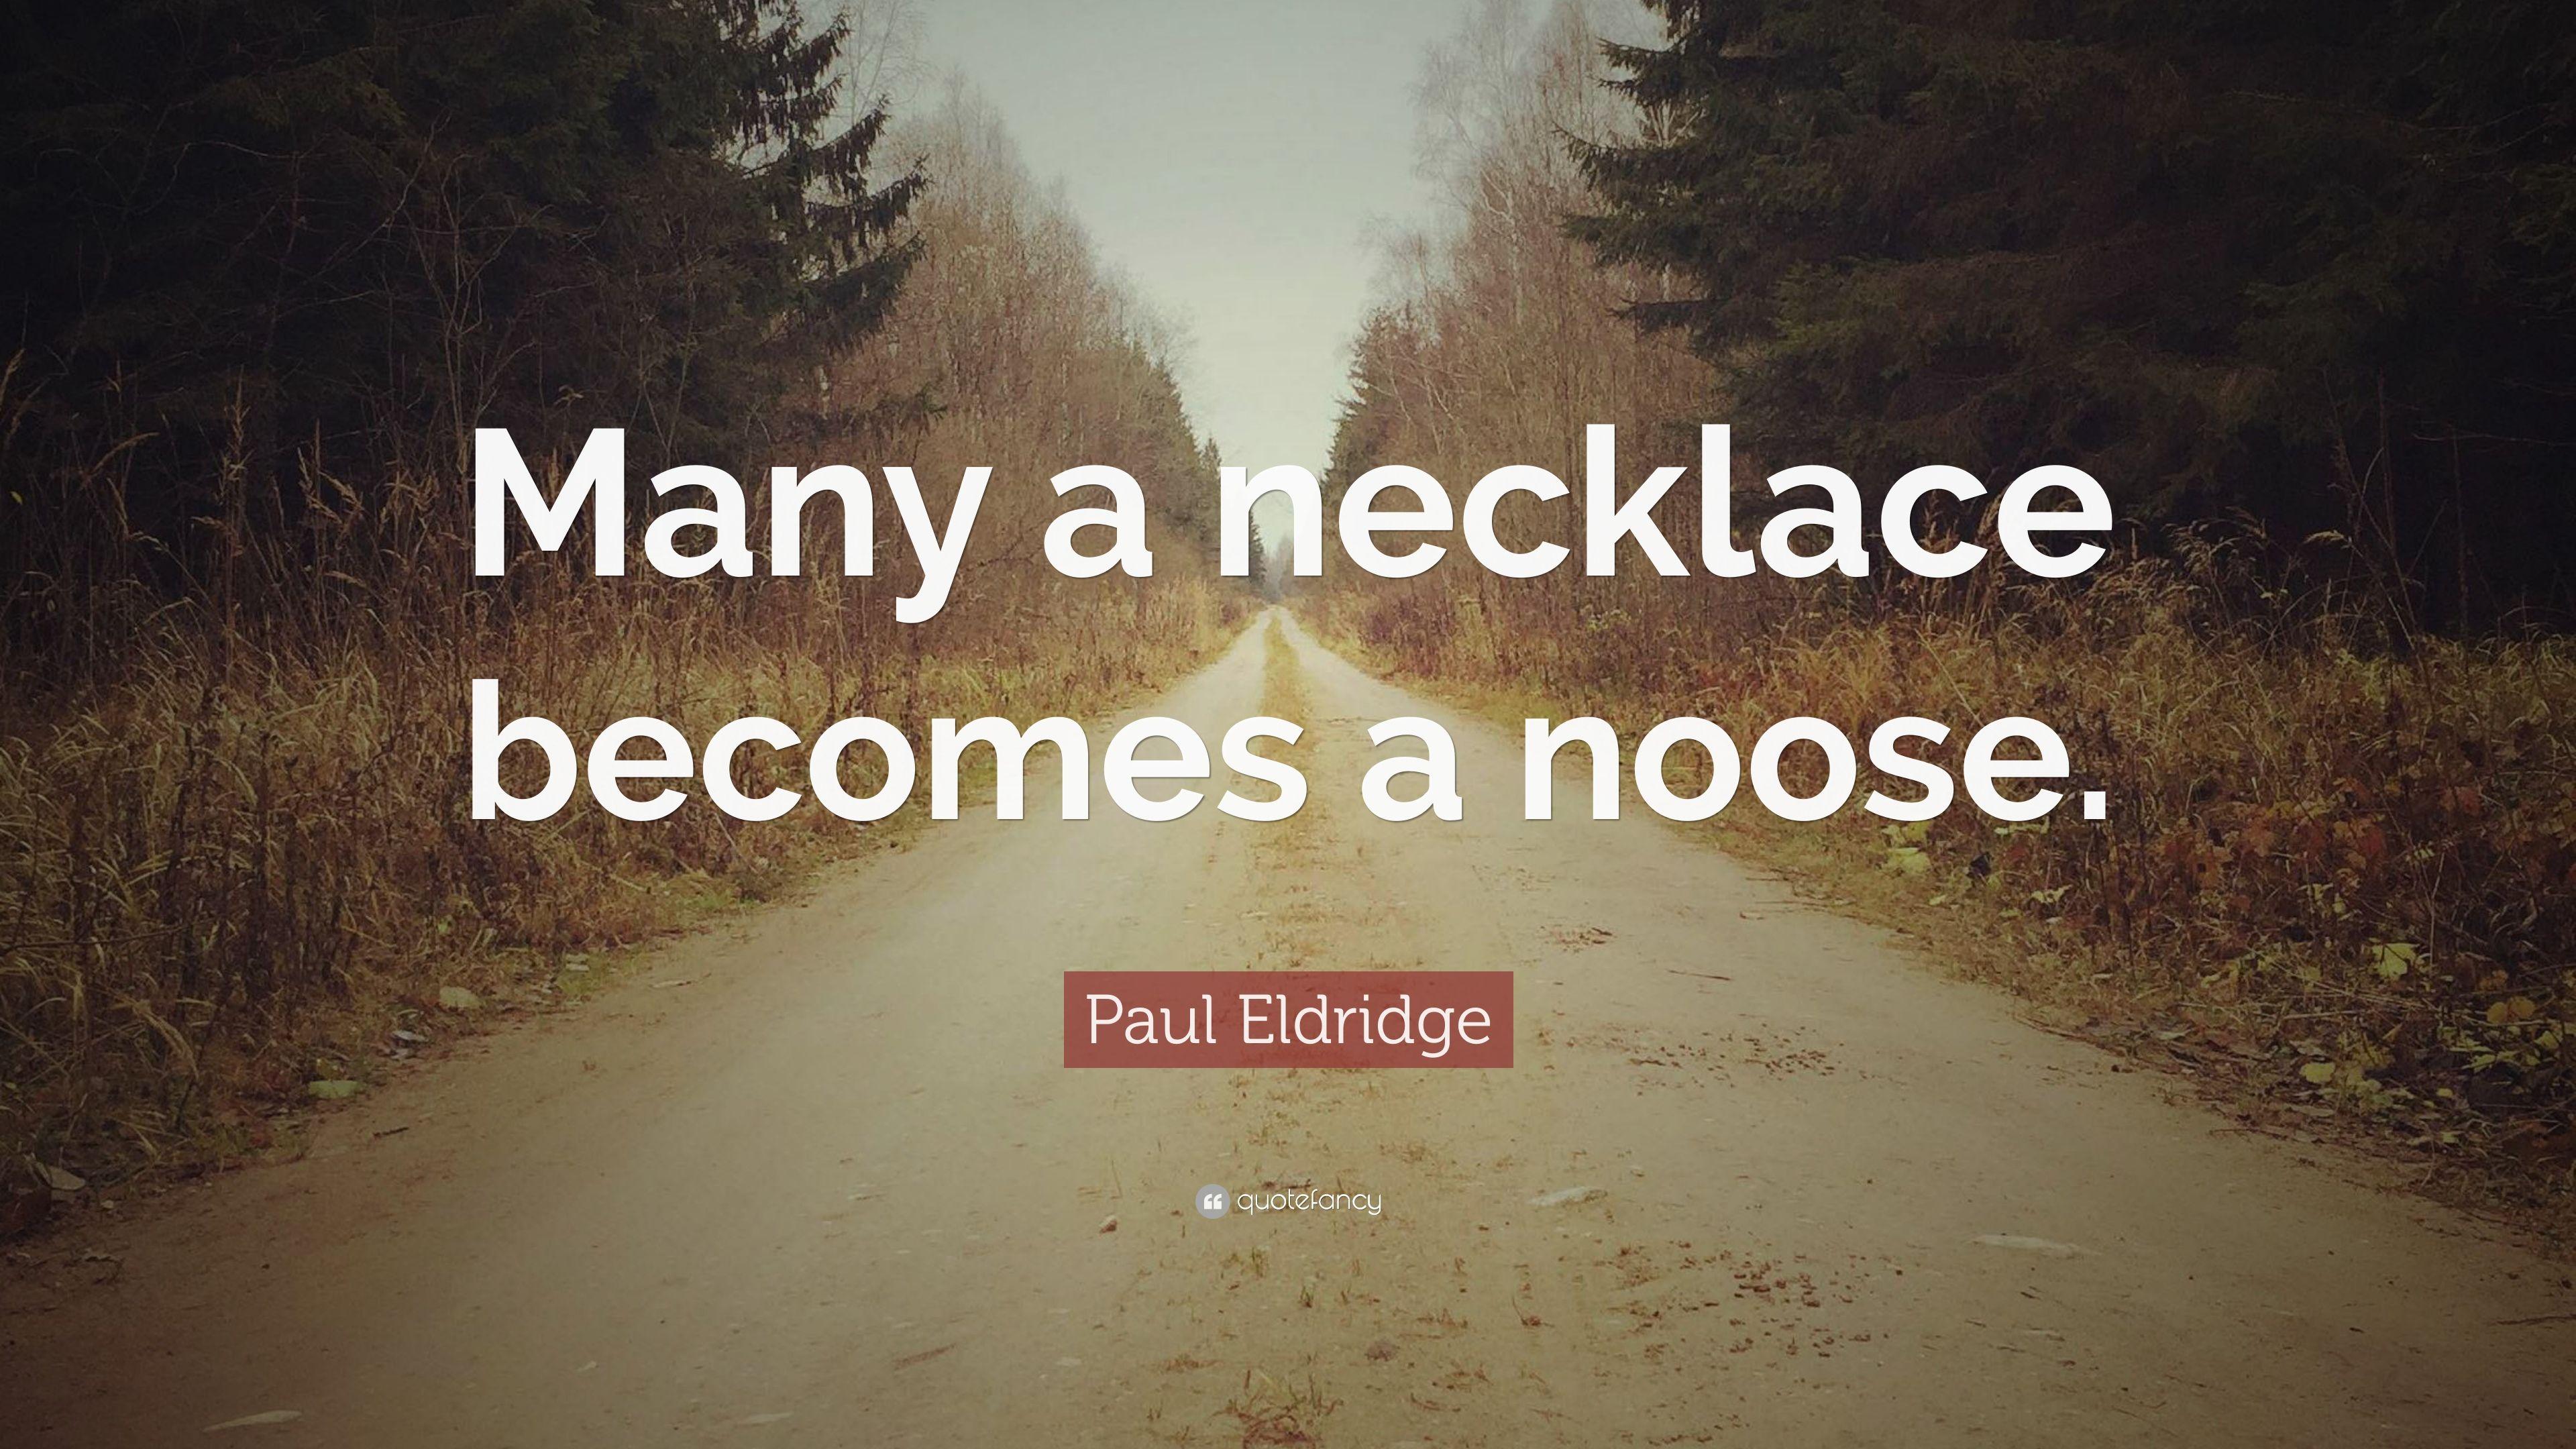 Paul Eldridge Quote: “Many a necklace becomes a noose.” 5